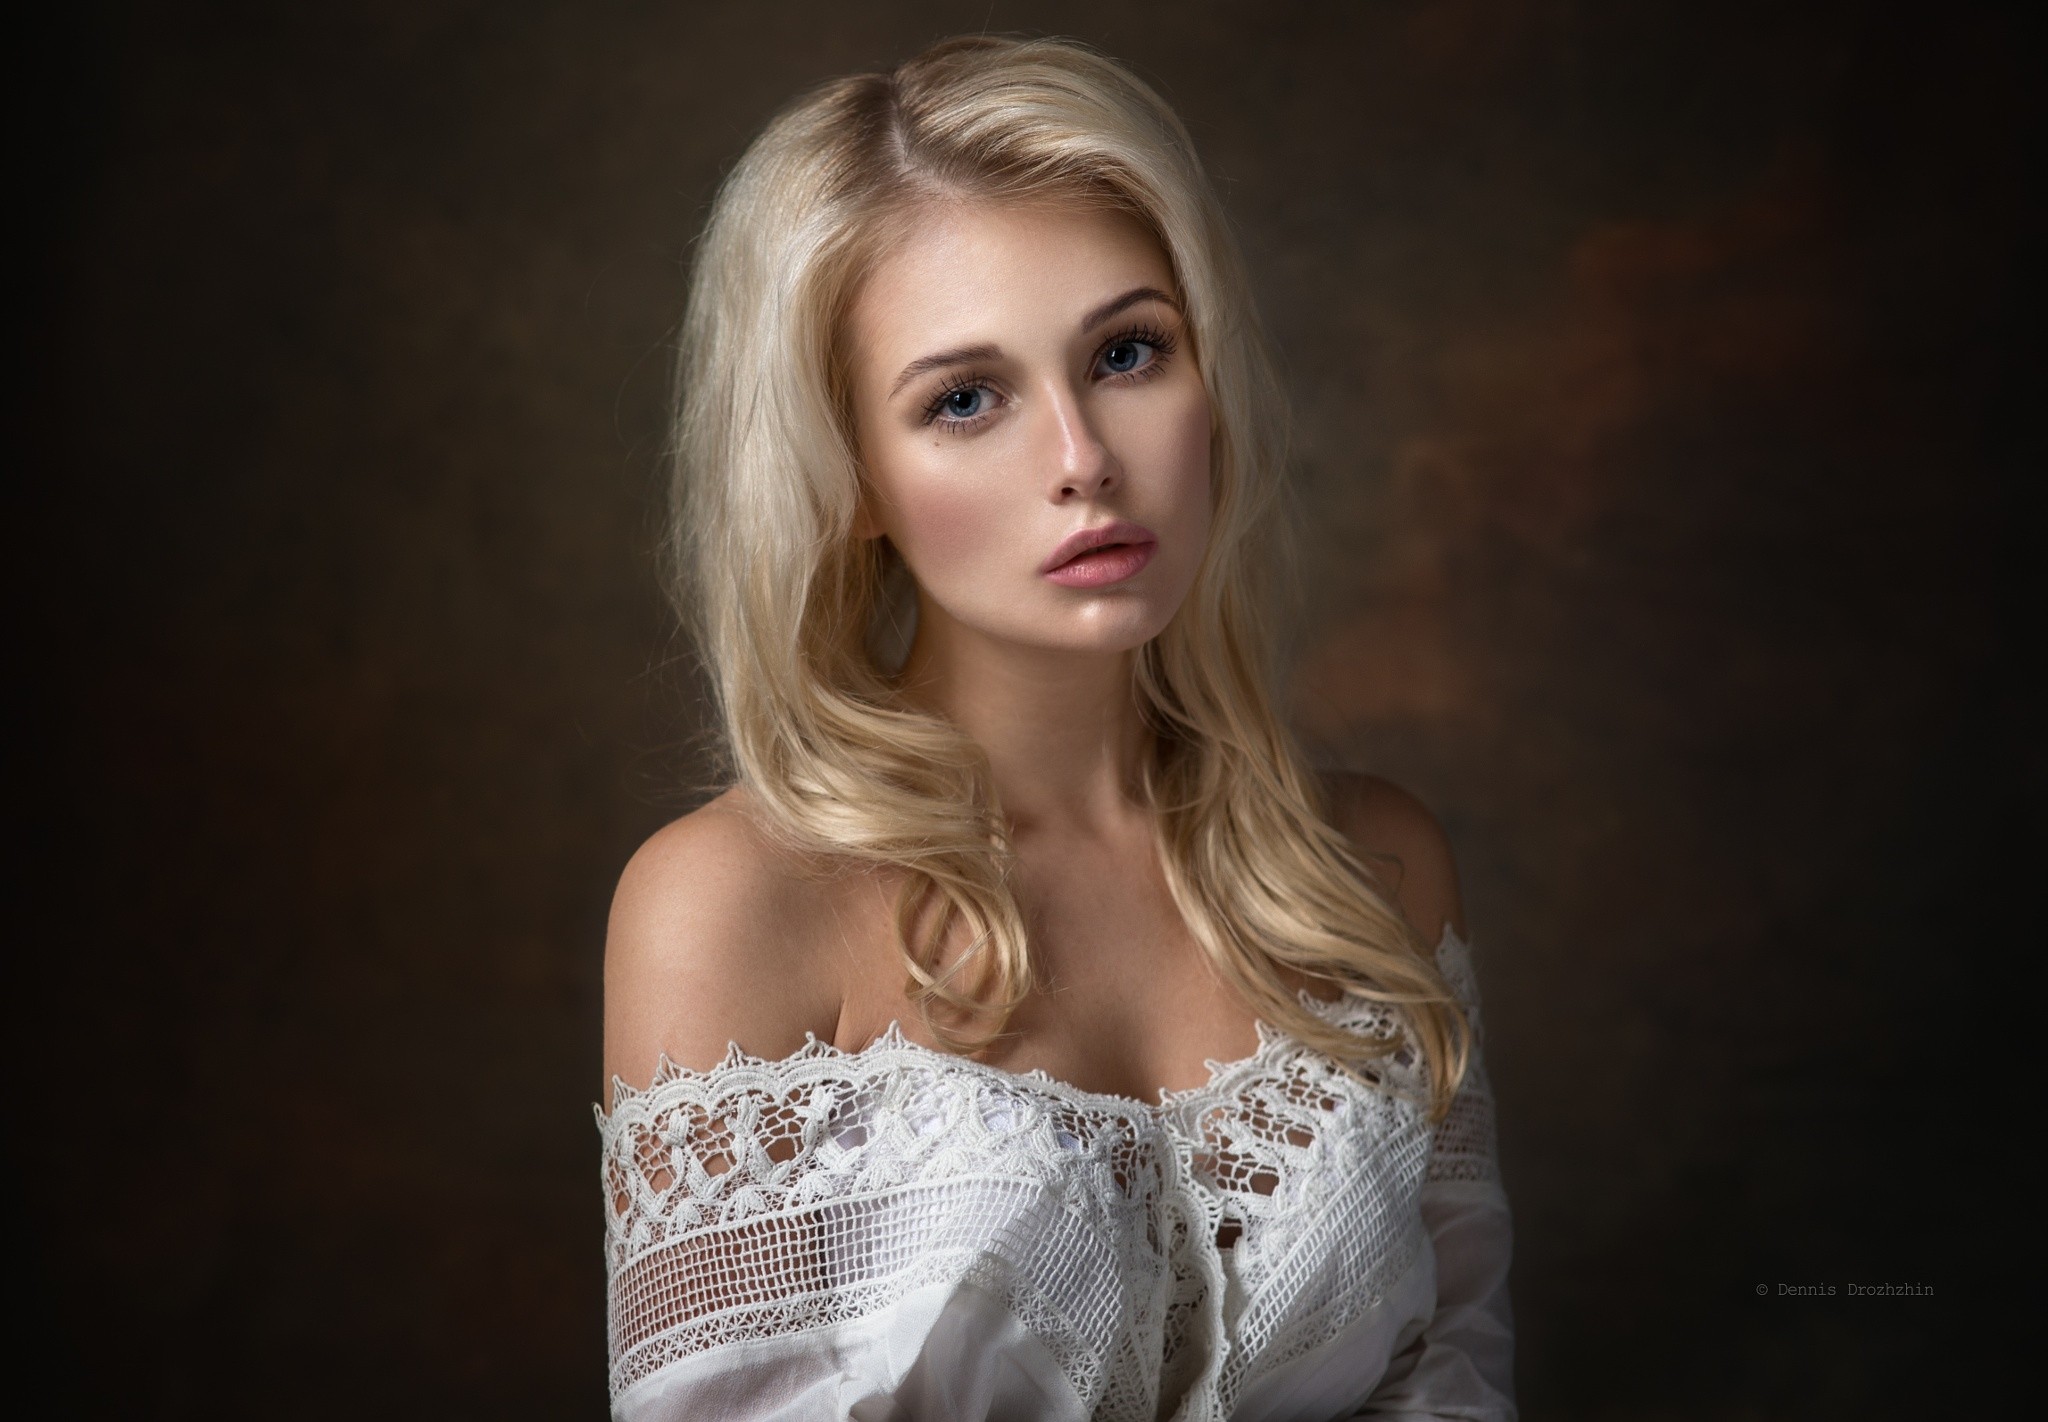 People 2048x1422 women blonde portrait face Dennis Drozhzhin model Christina bare shoulders gray eyes no bra cleavage lace top white tops studio women indoors indoors makeup dyed hair looking at viewer